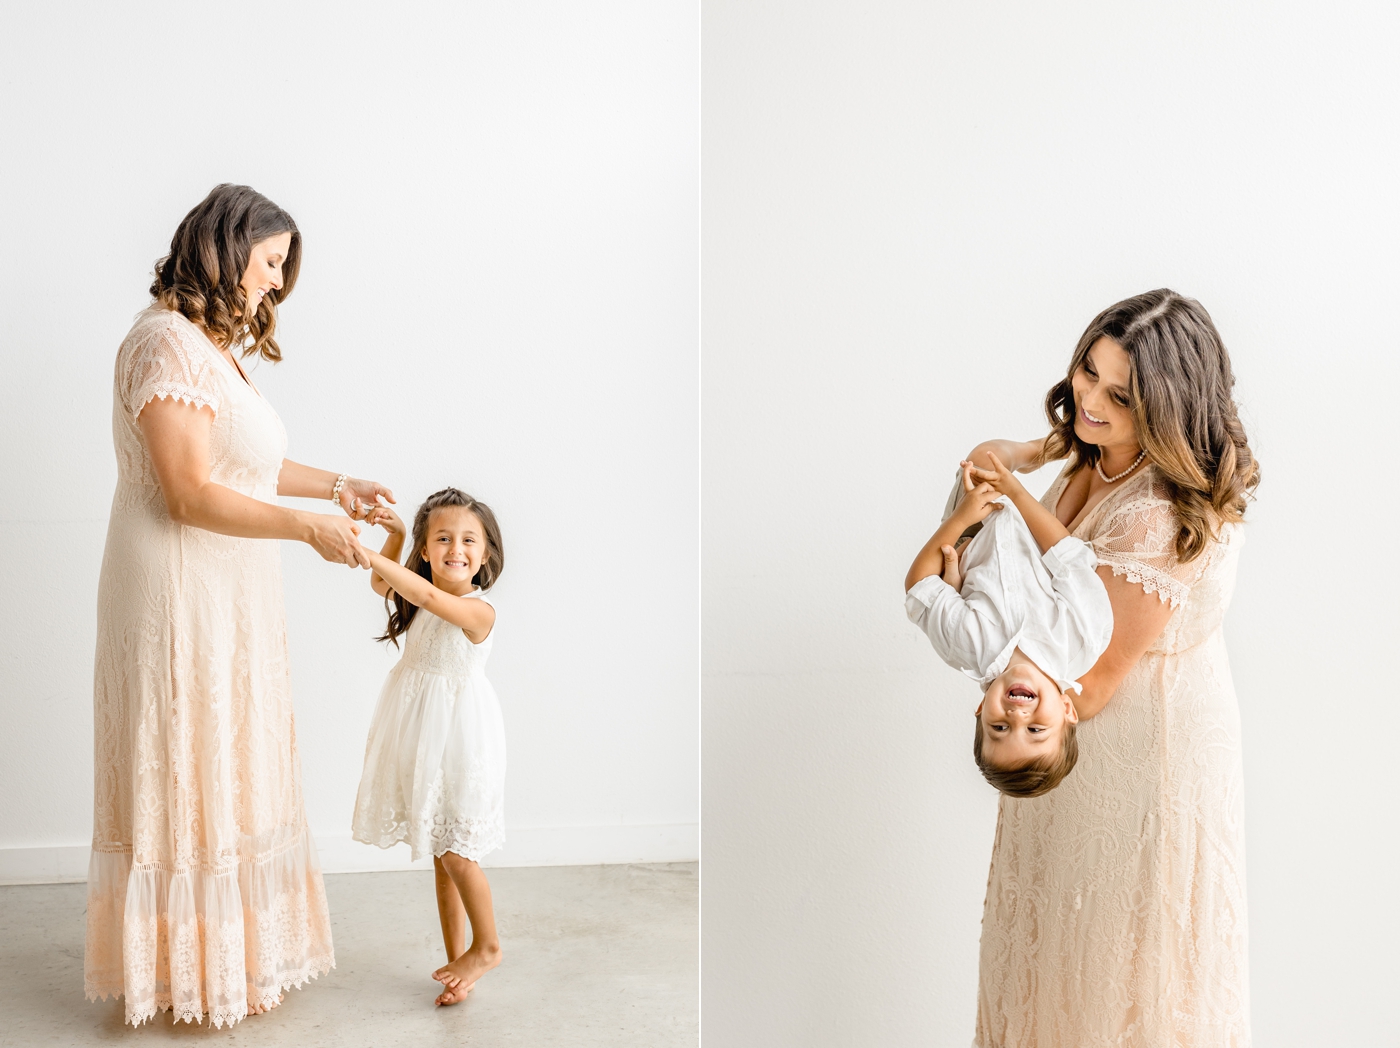 Mom playing with oldest daughter and little boy during session in studio. Photos by Sana Ahmed Photography.